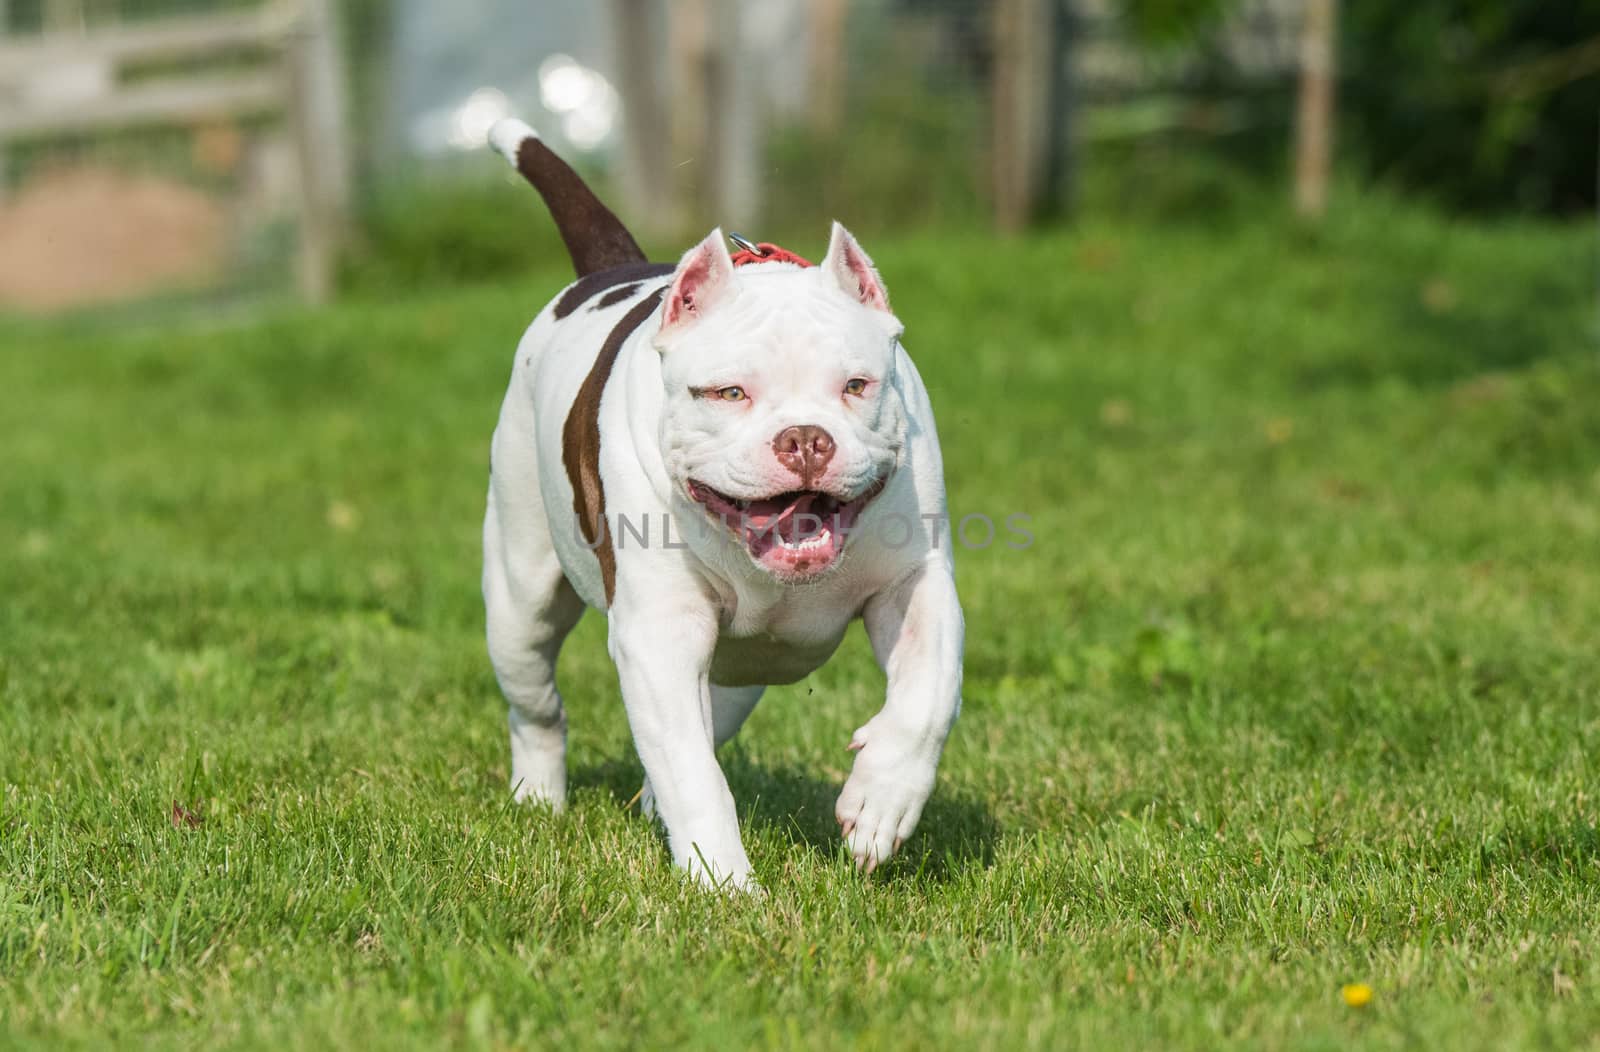 American Bully puppy dog in move on grass by infinityyy